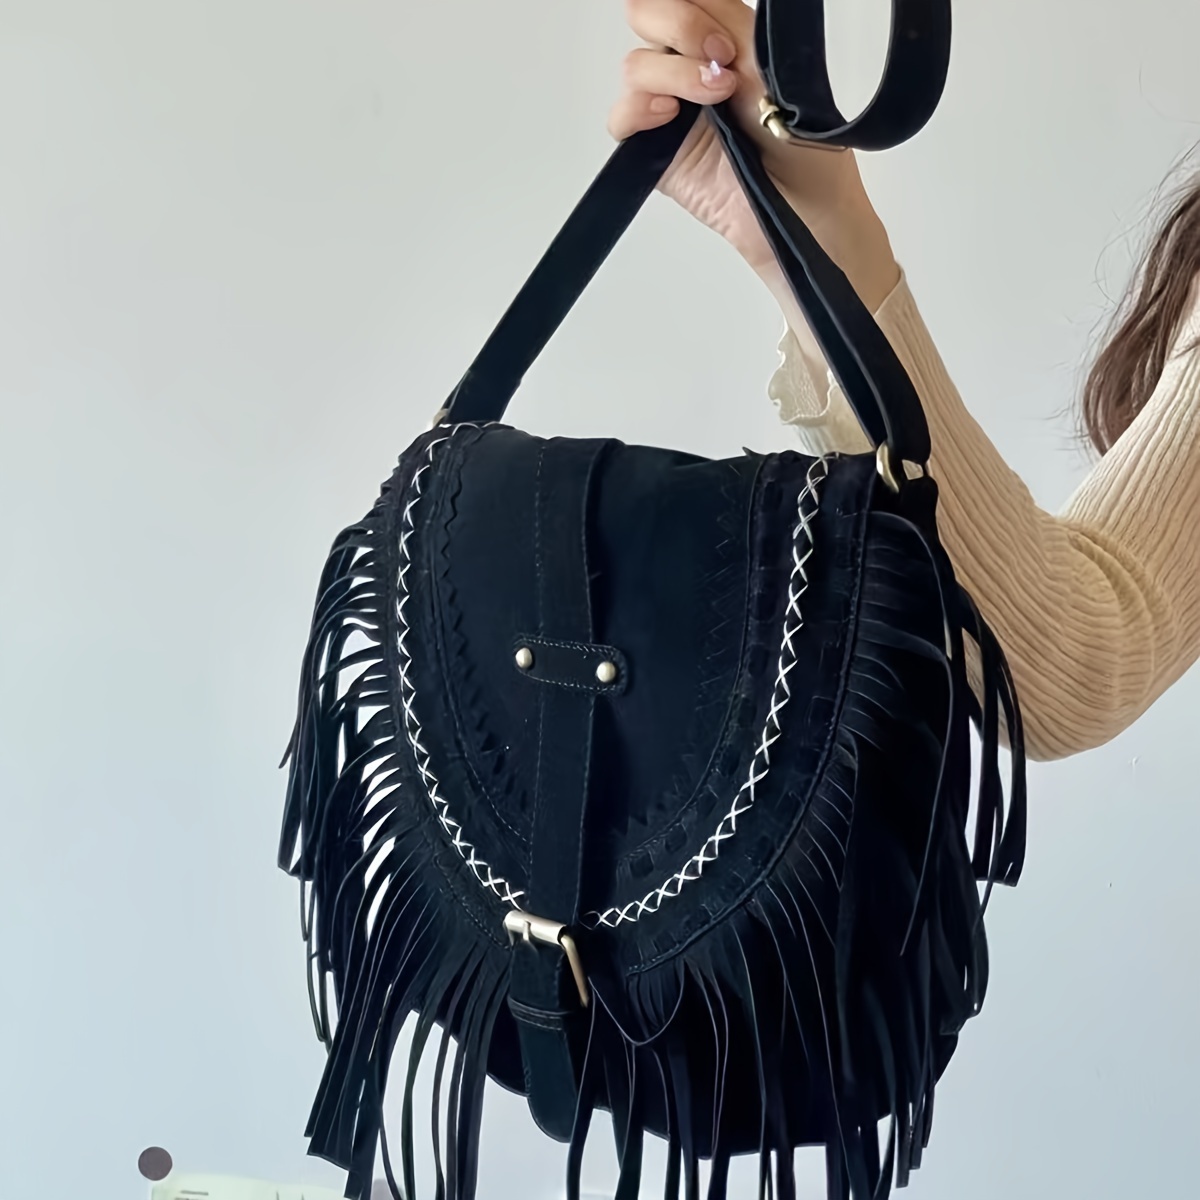 

Bohemian Fringe Crossbody Bag For Women, Retro Style Shoulder Bag, Versatile Saddle Bag With Tassel Detail, Beach And Casual Outing Purse